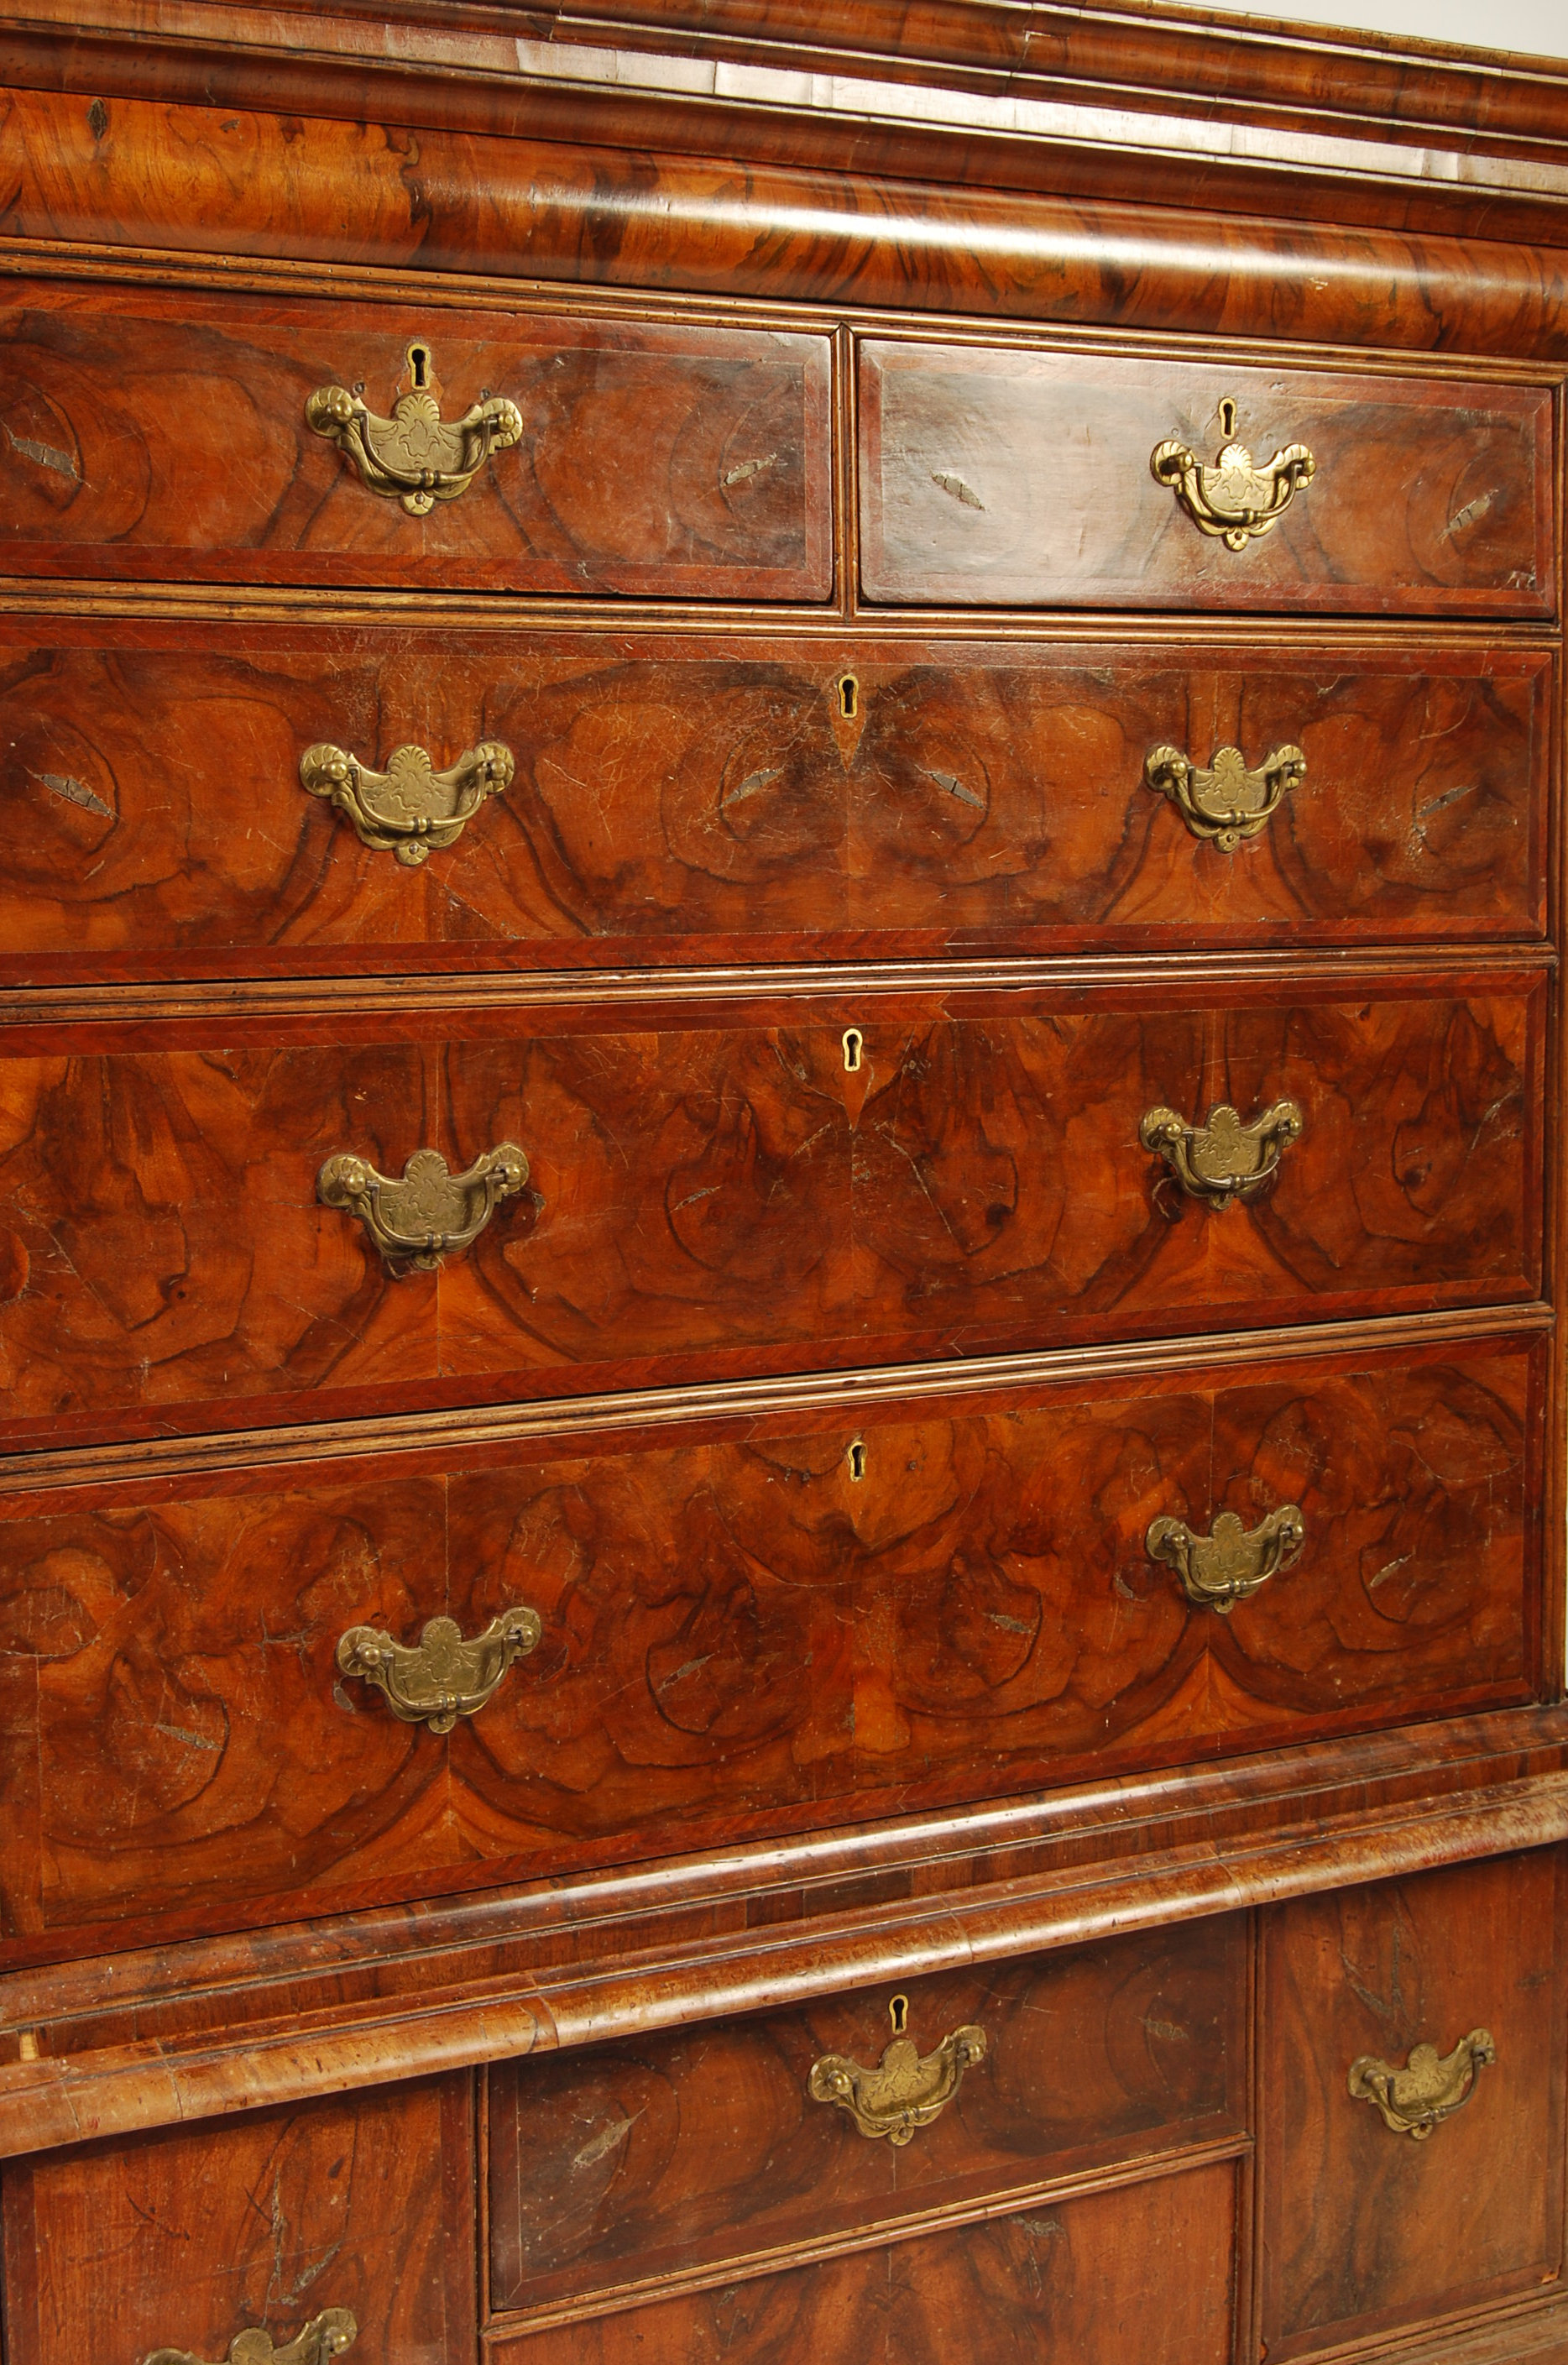 LATE 17TH / 18TH CENTURY WALNUT CHEST ON STAND - Image 3 of 11